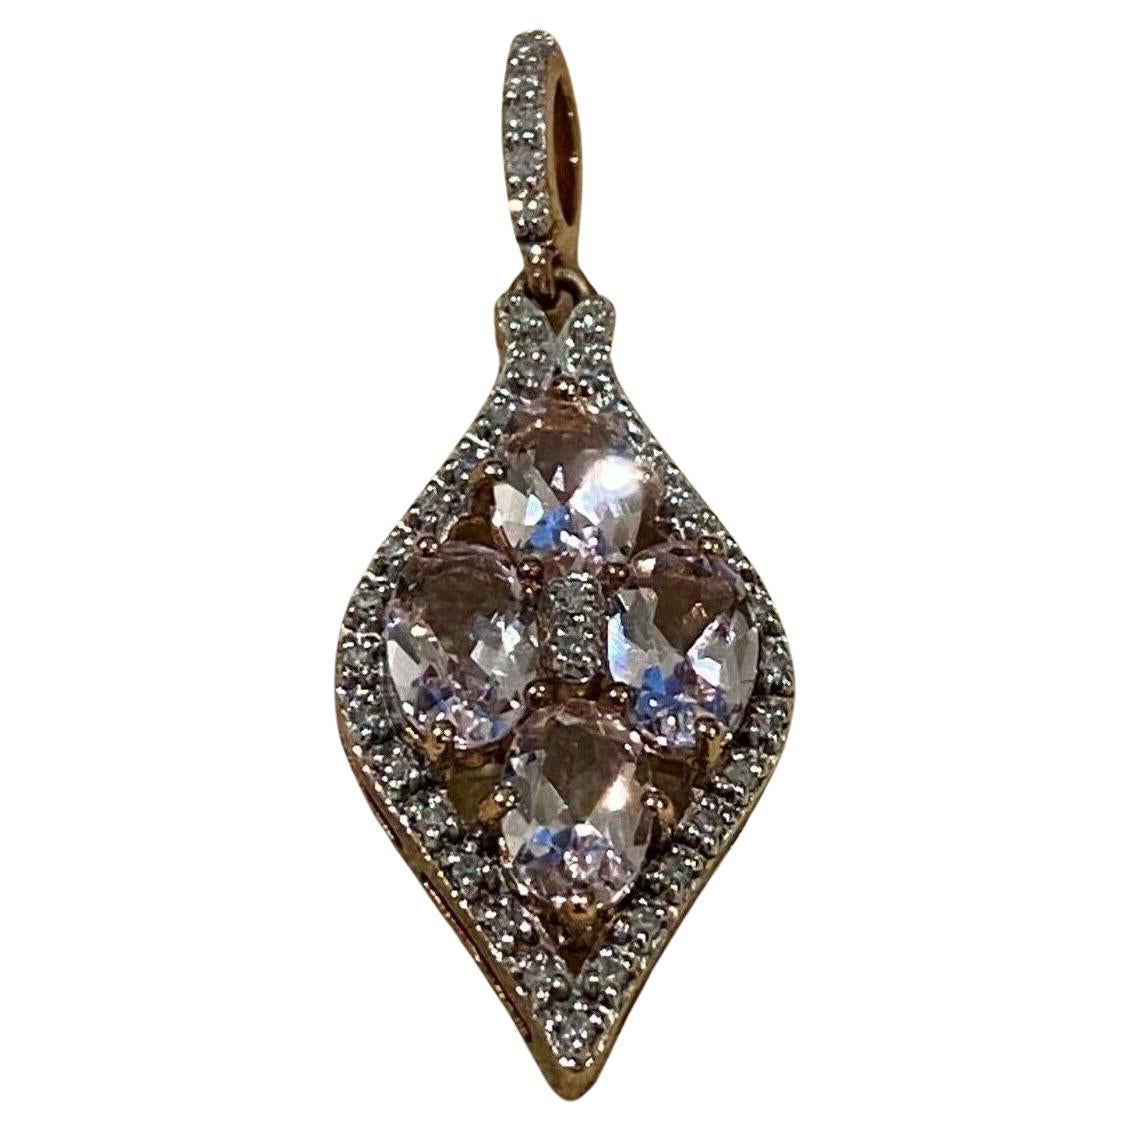 Magnificent 1.60ct Morganite & Diamond Flower Shaped Pendant in 9K 9ct Rose Gold